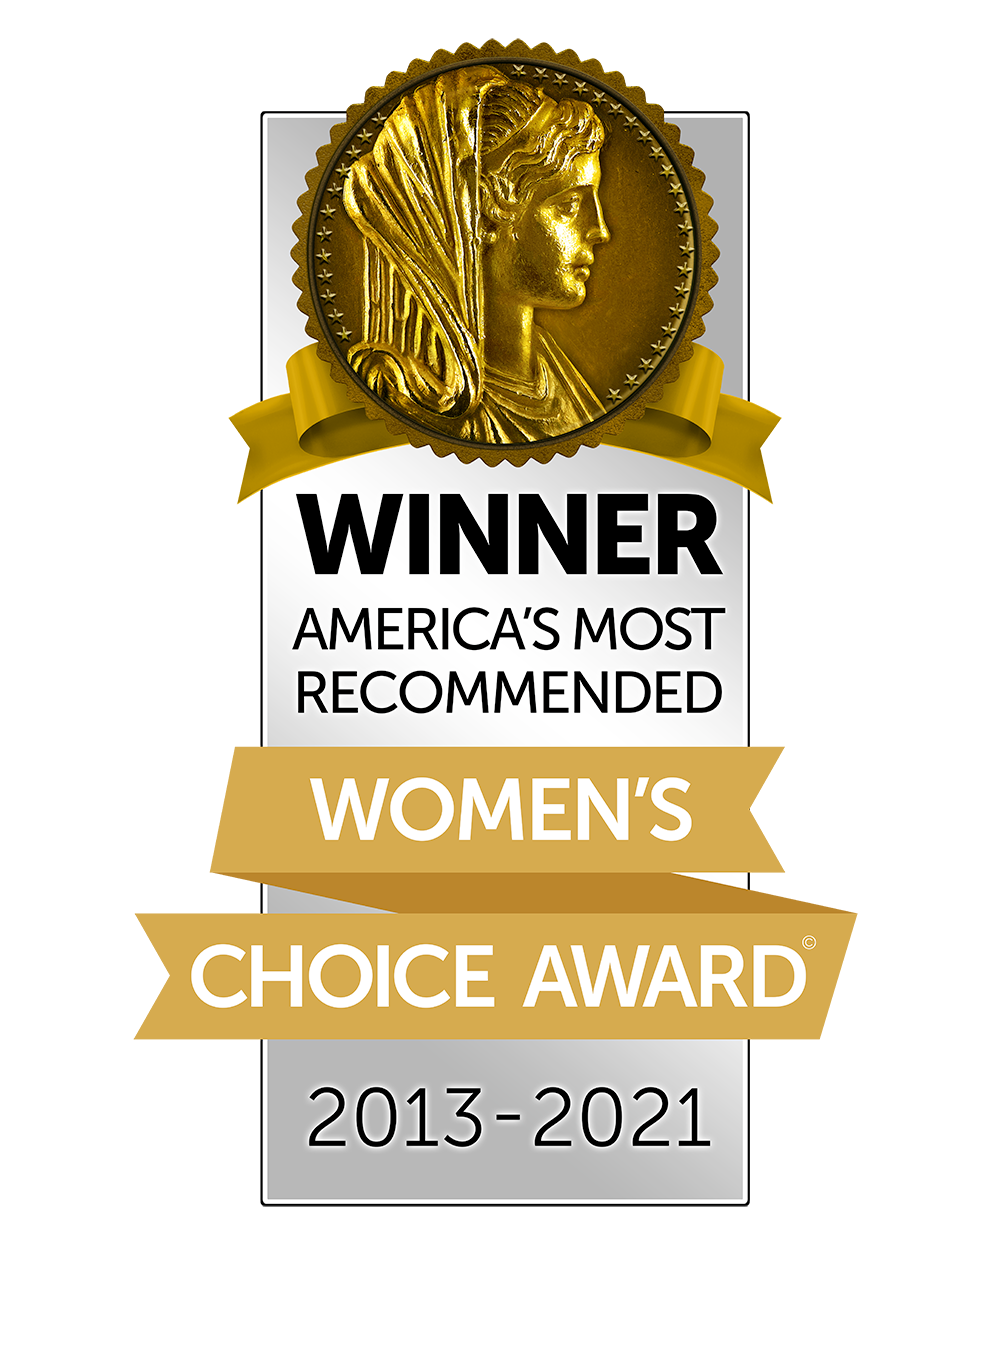 2013-2021 Women's Choice Award: America's Most Recommended 